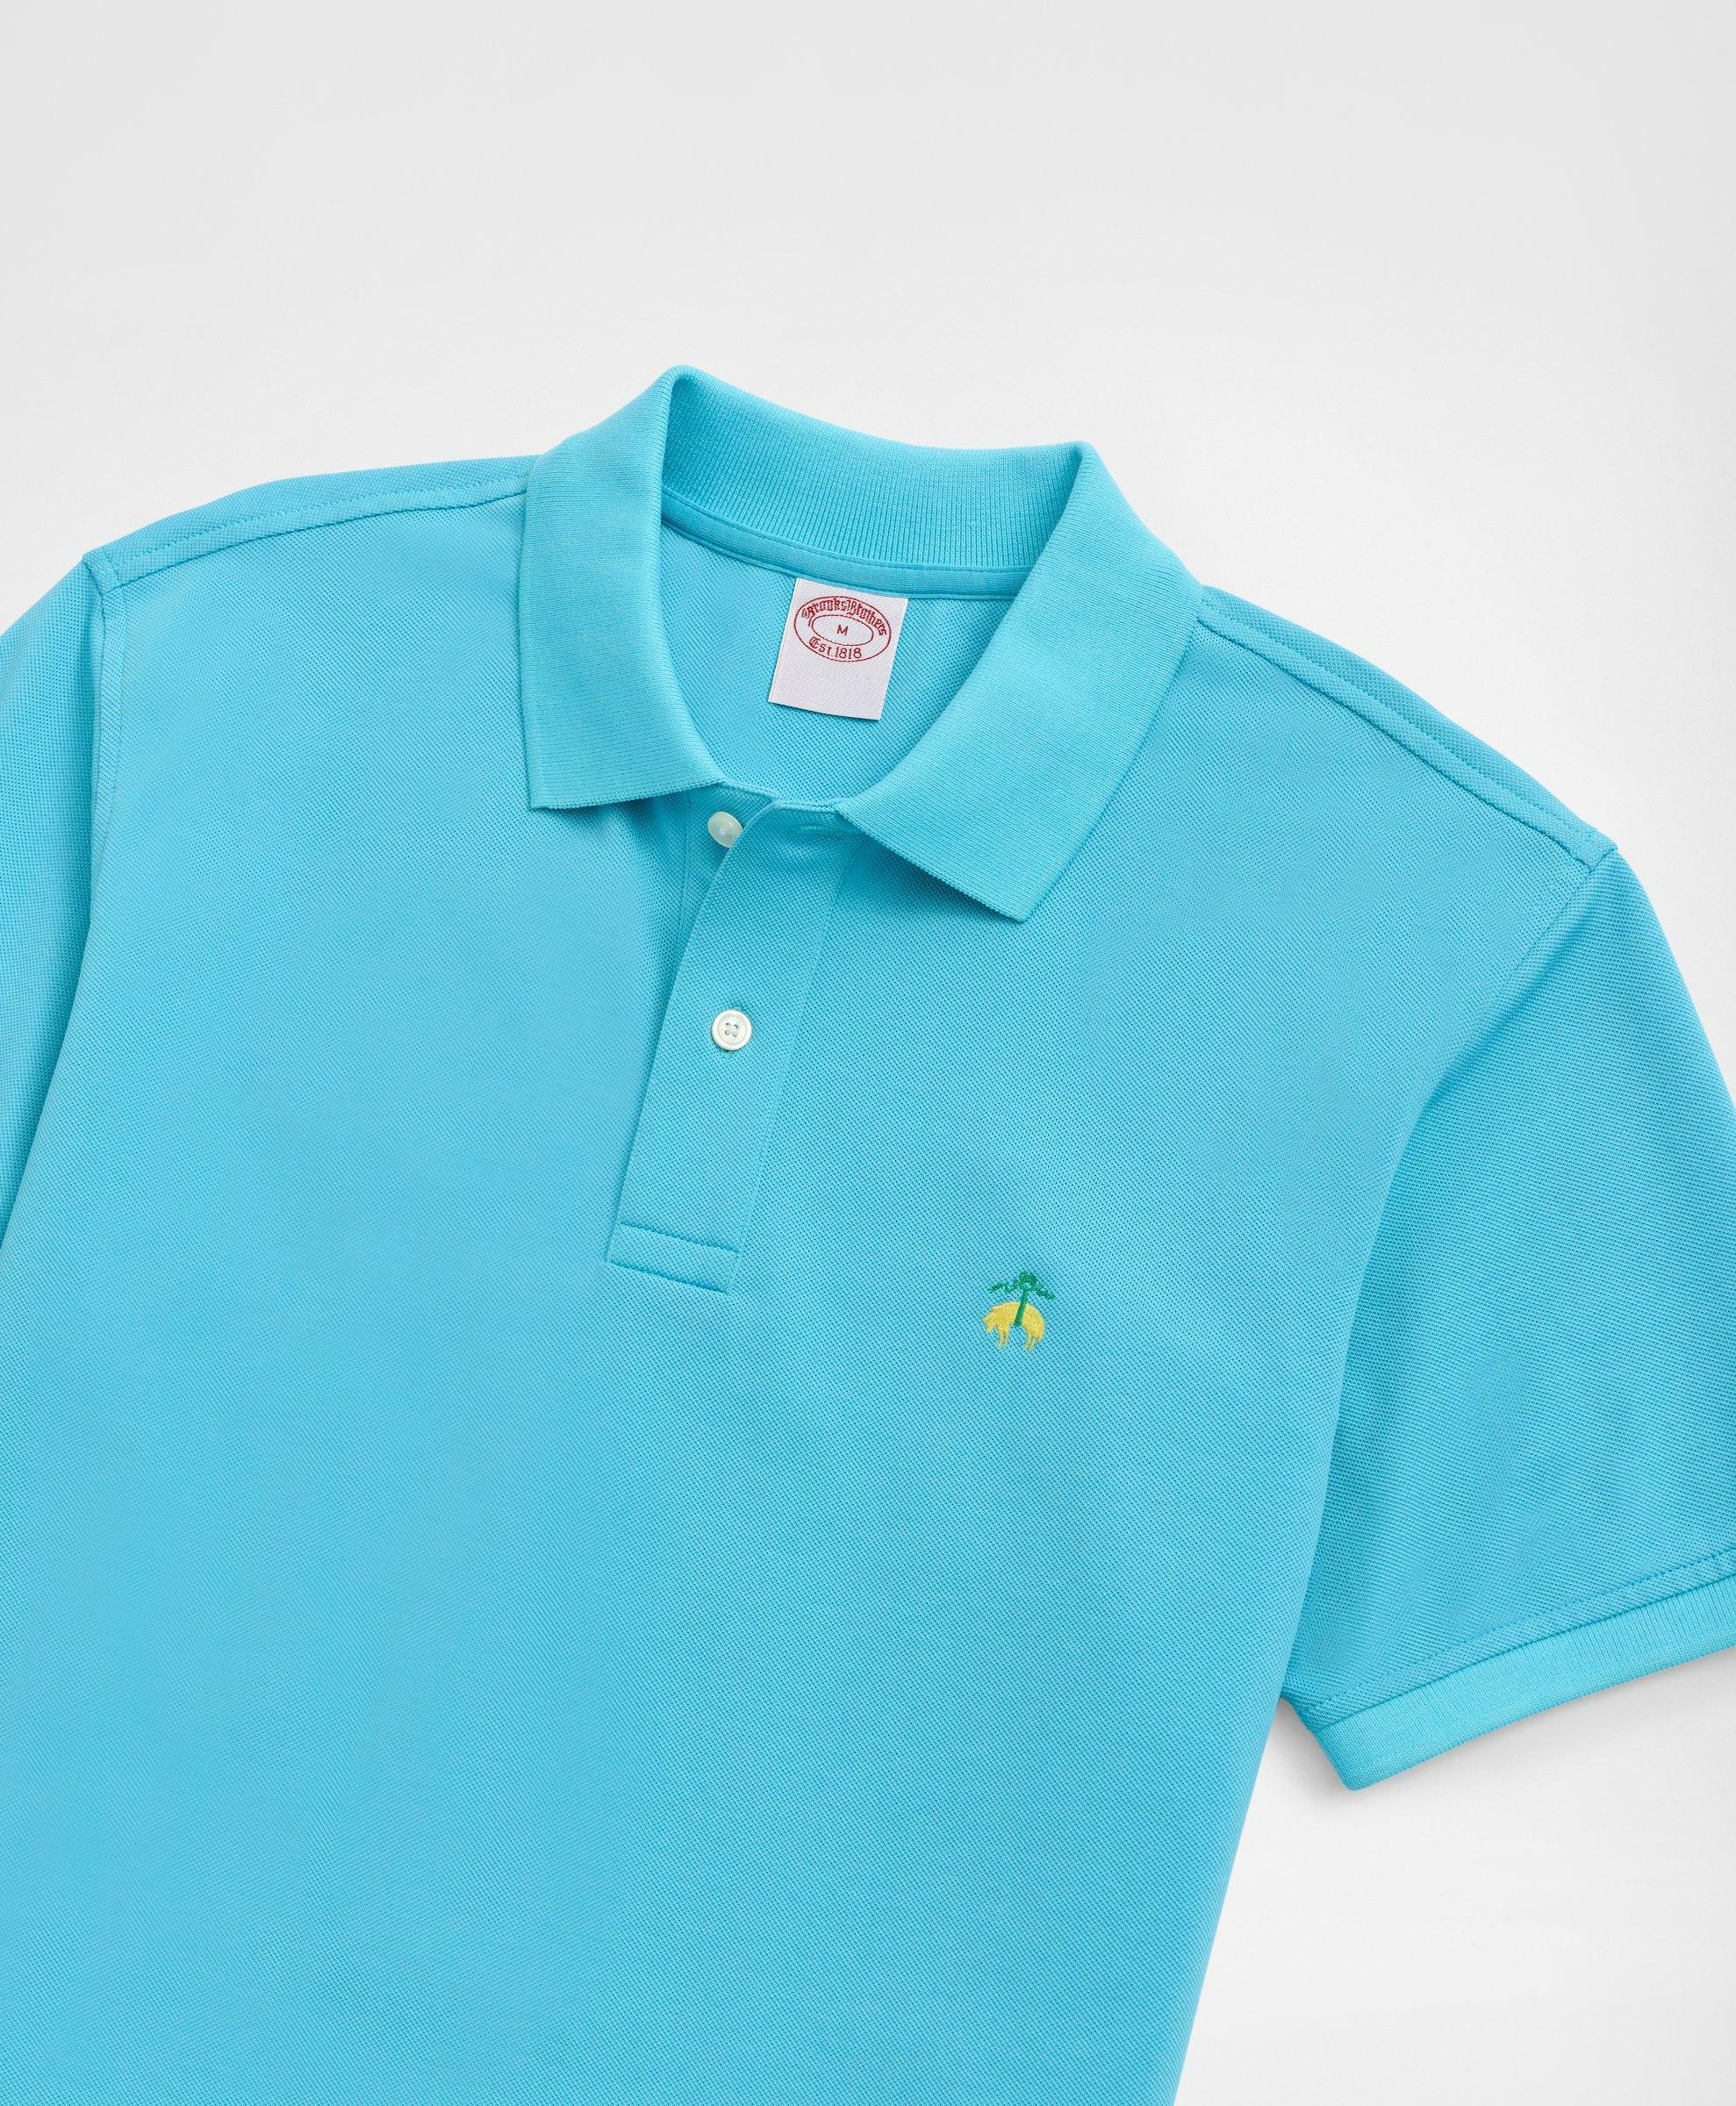 Brooks Brothers Men's Golden Fleece Original Fit Stretch Supima Polo Shirt | Turquoise